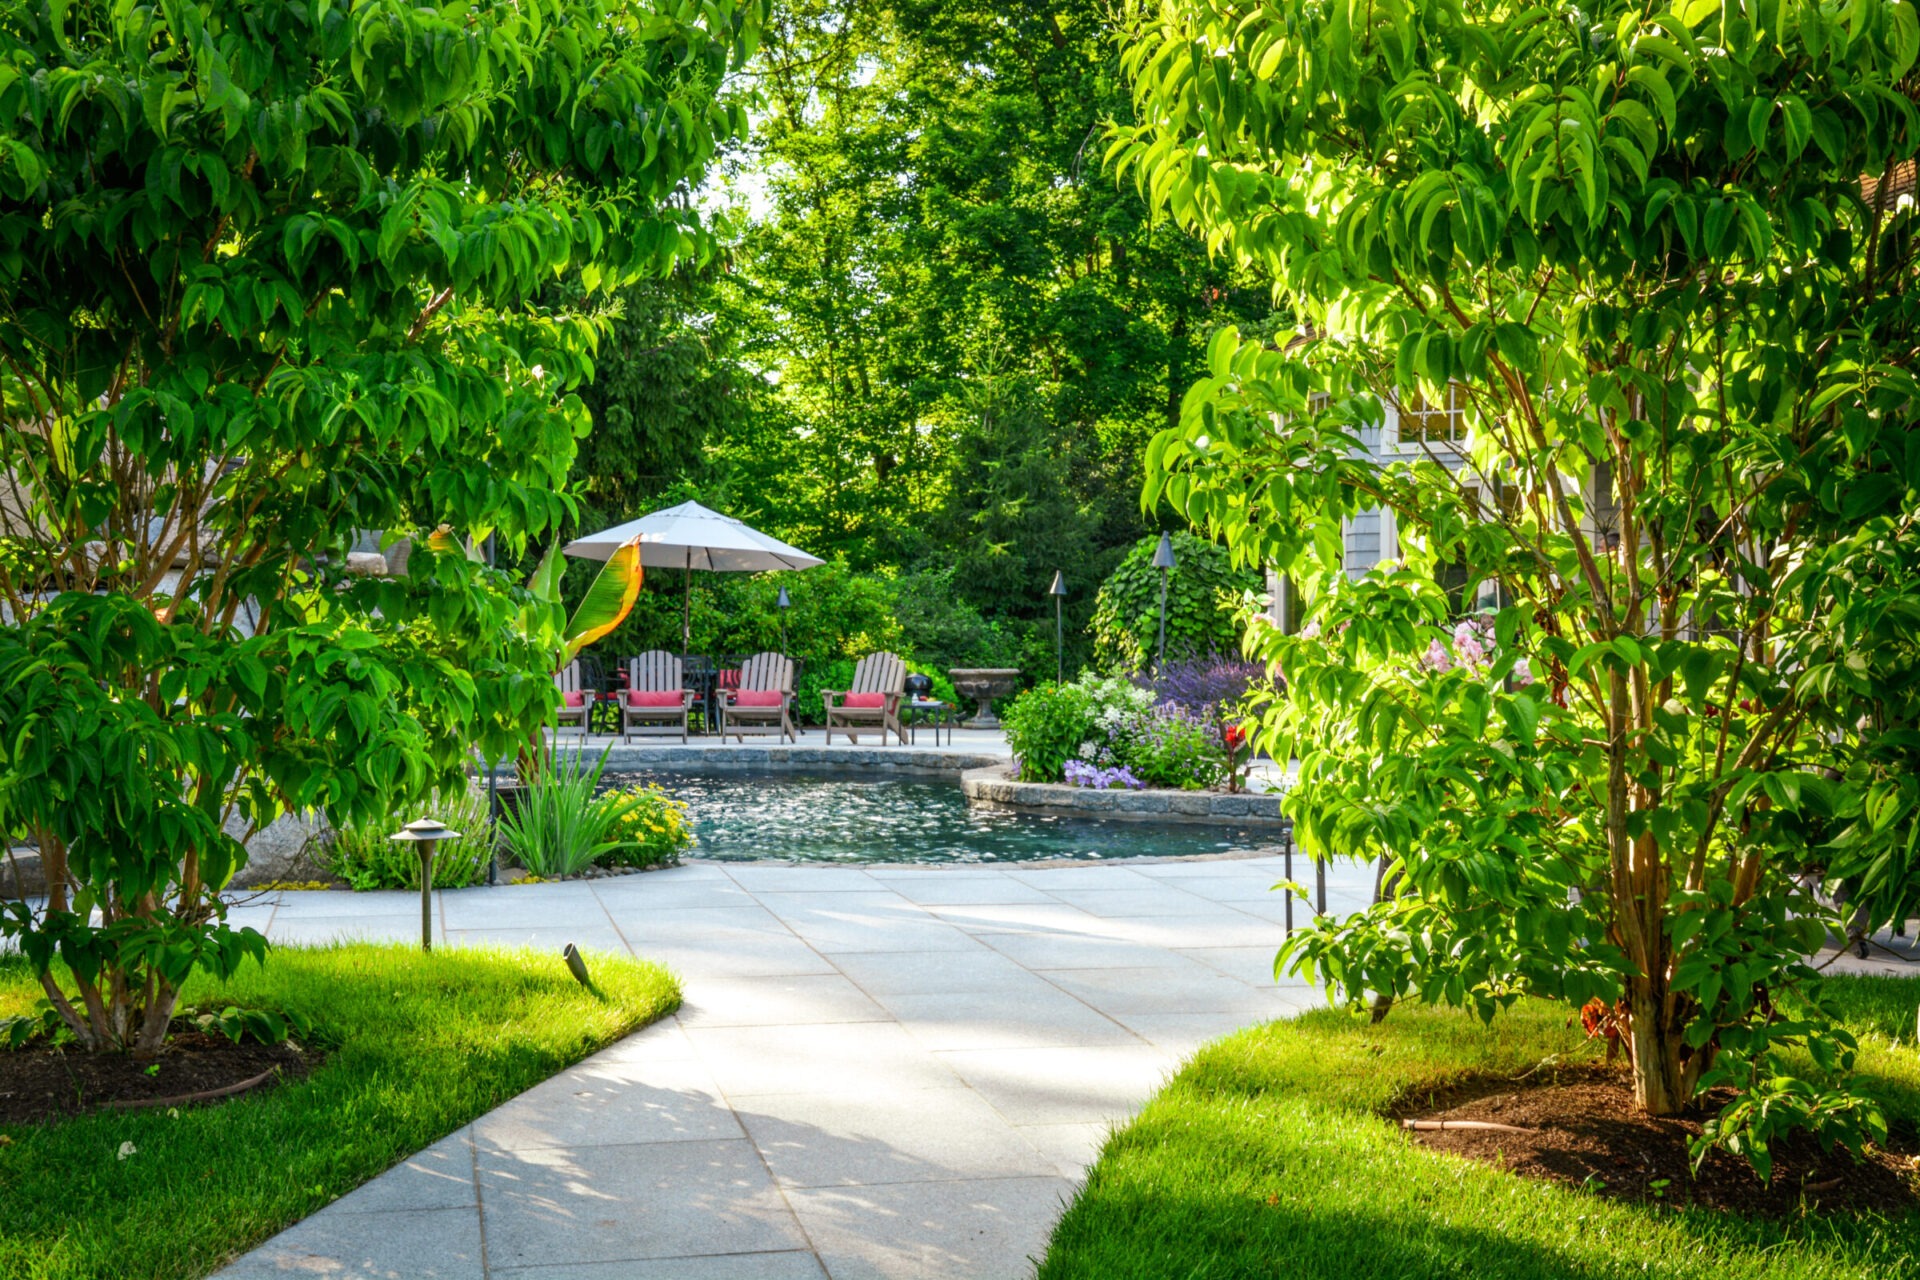 A tranquil garden setting featuring a swimming pool, lounge chairs under an umbrella, lush greenery, landscaped plants, and a paved walkway bathed in sunlight.